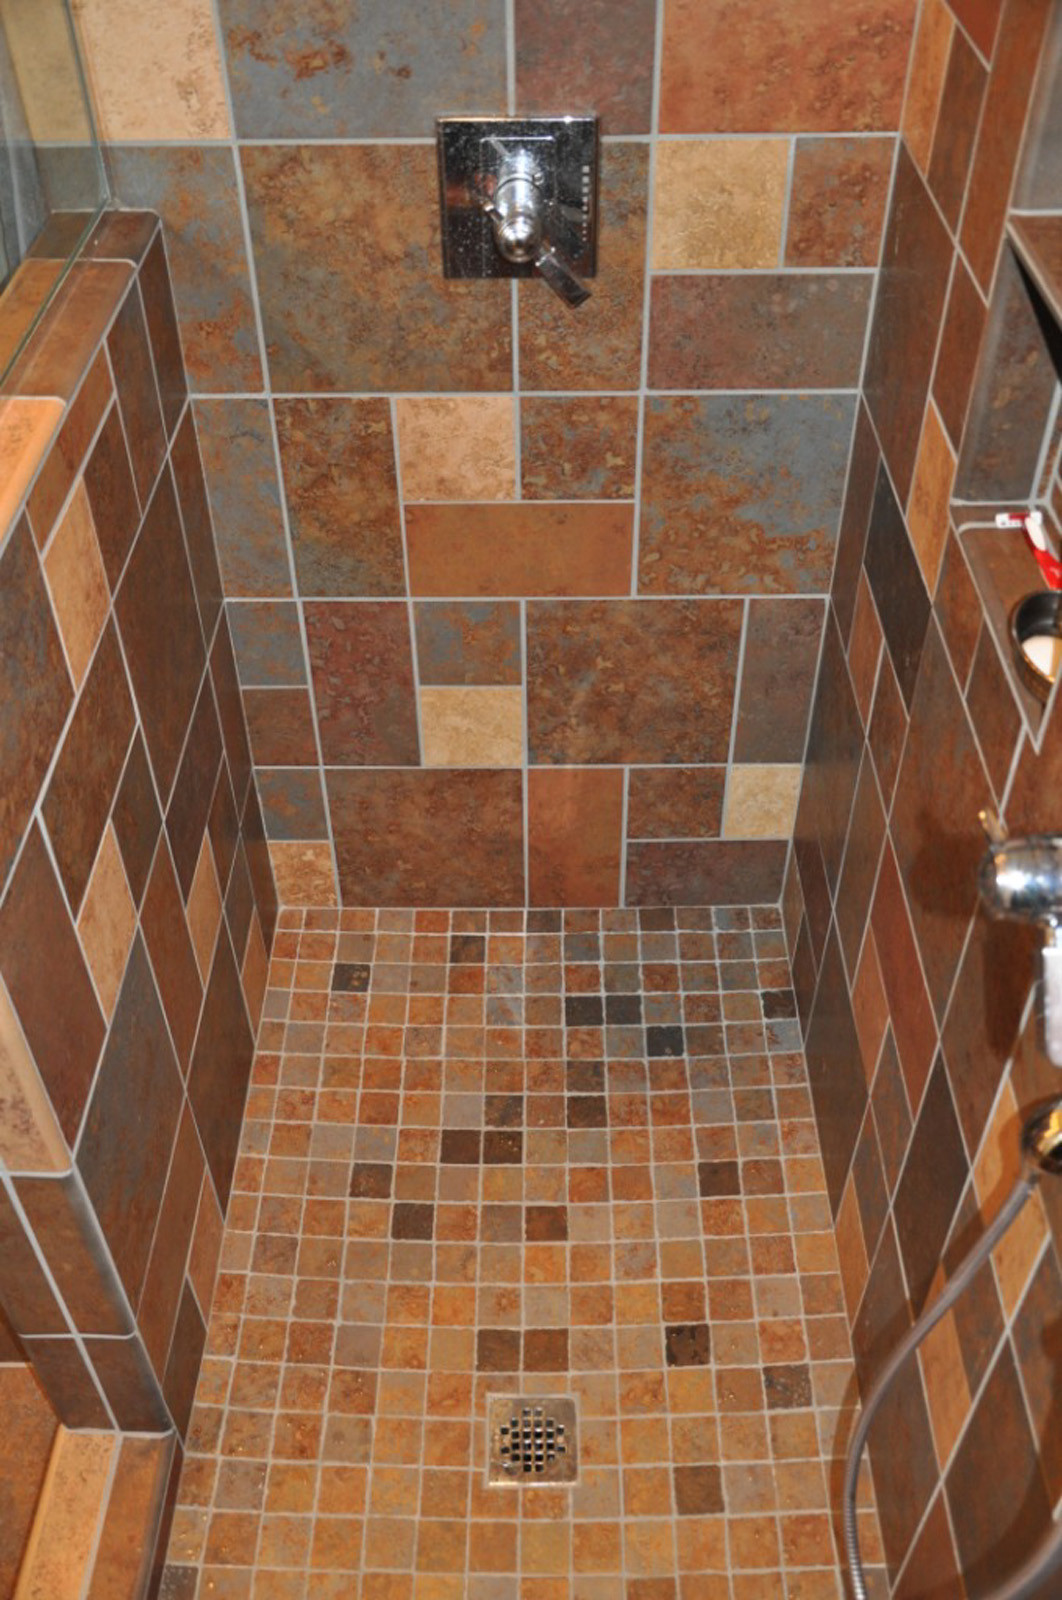 Cover Bathroom Tile Floor
 Tile is not just something to cover your shower walls